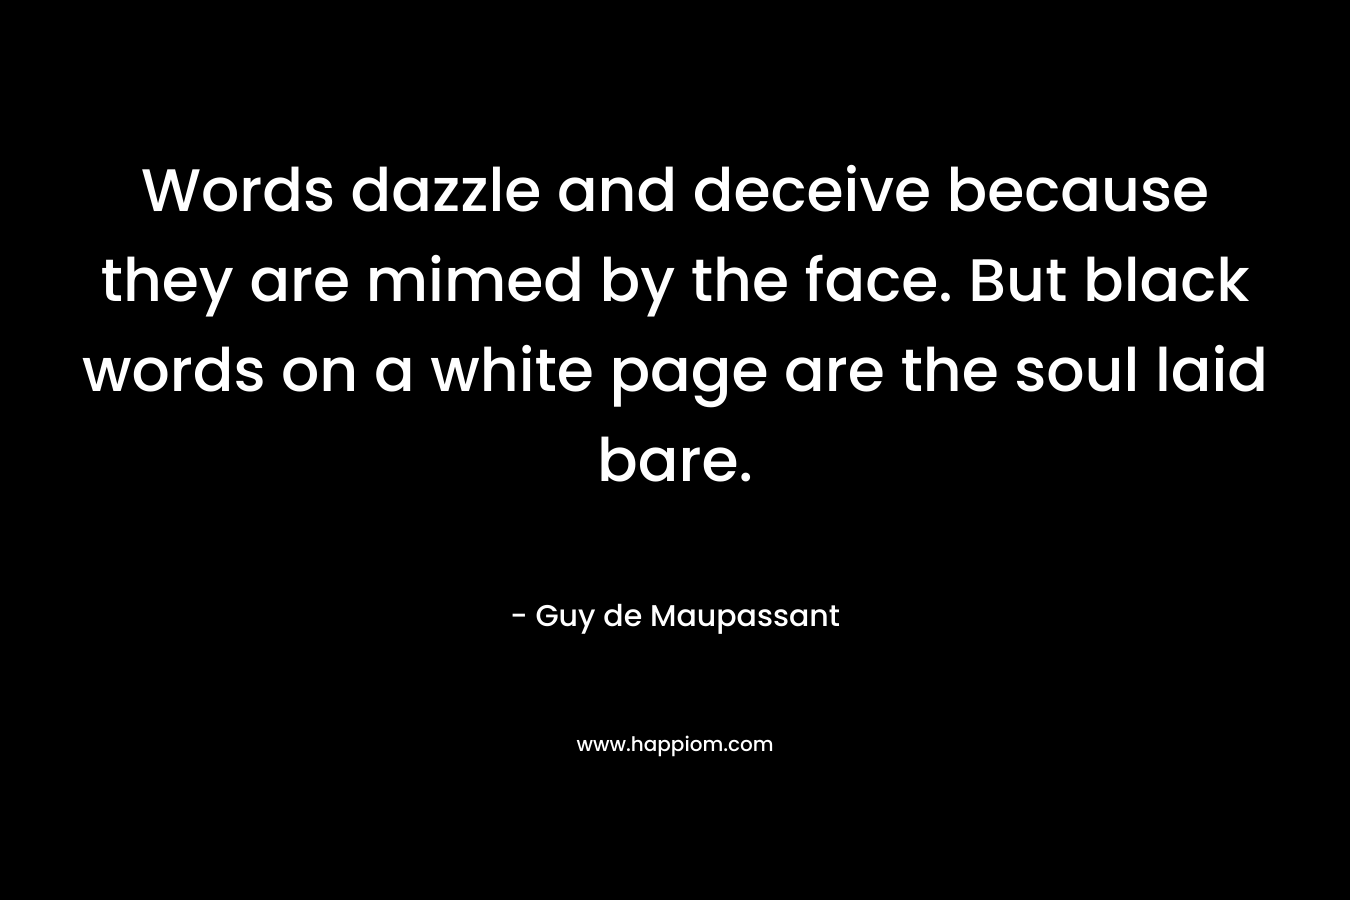 Words dazzle and deceive because they are mimed by the face. But black words on a white page are the soul laid bare.